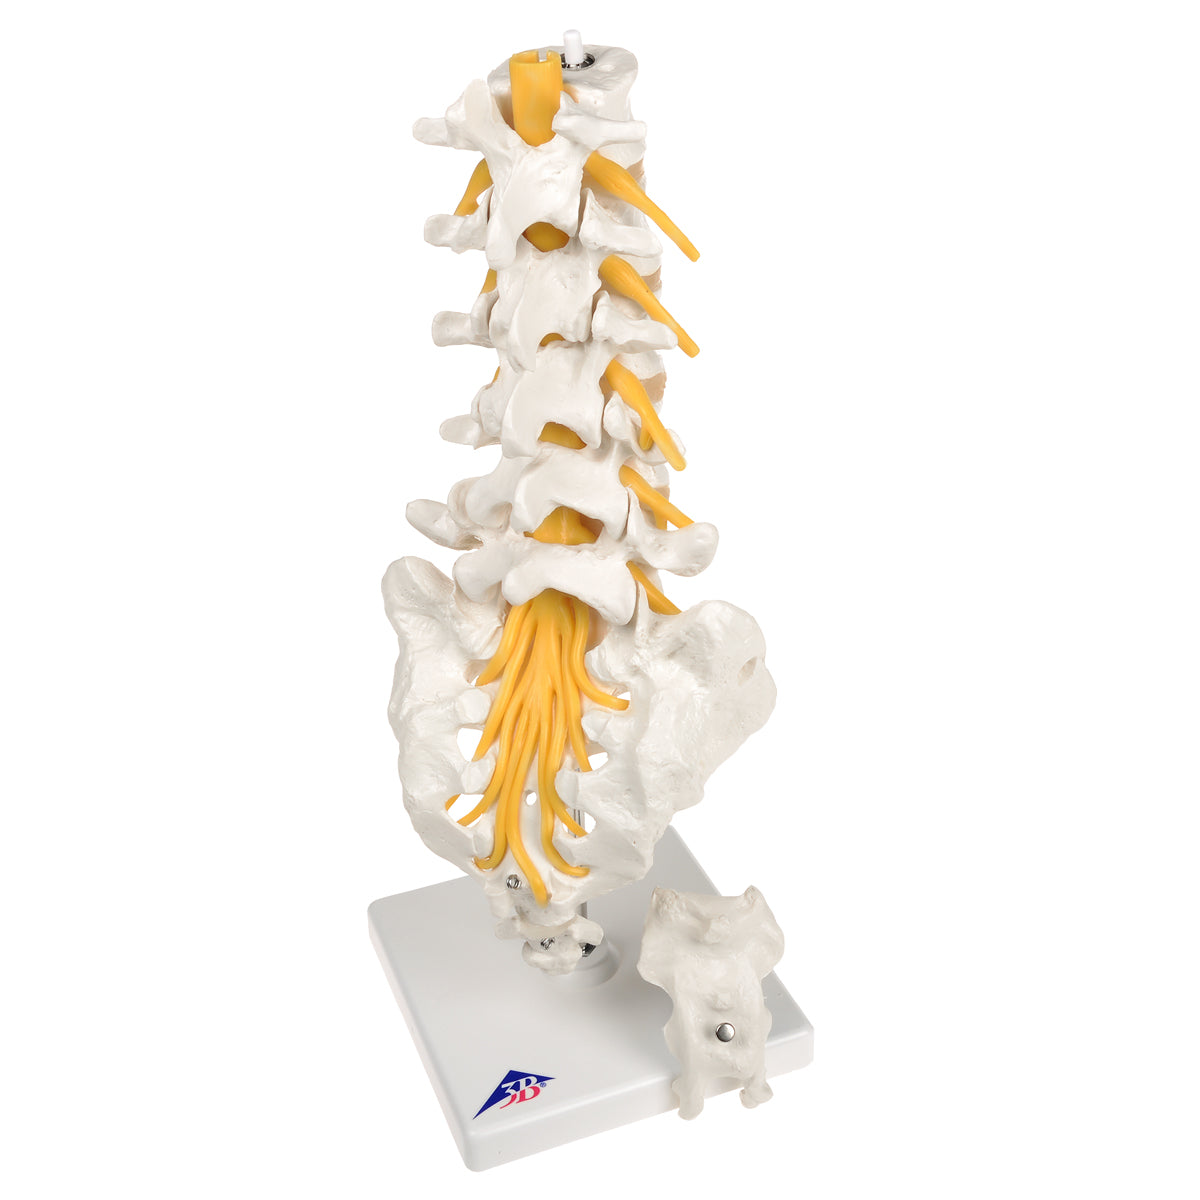 Flexible model of the lower back, sacrum and coccyx with nerves